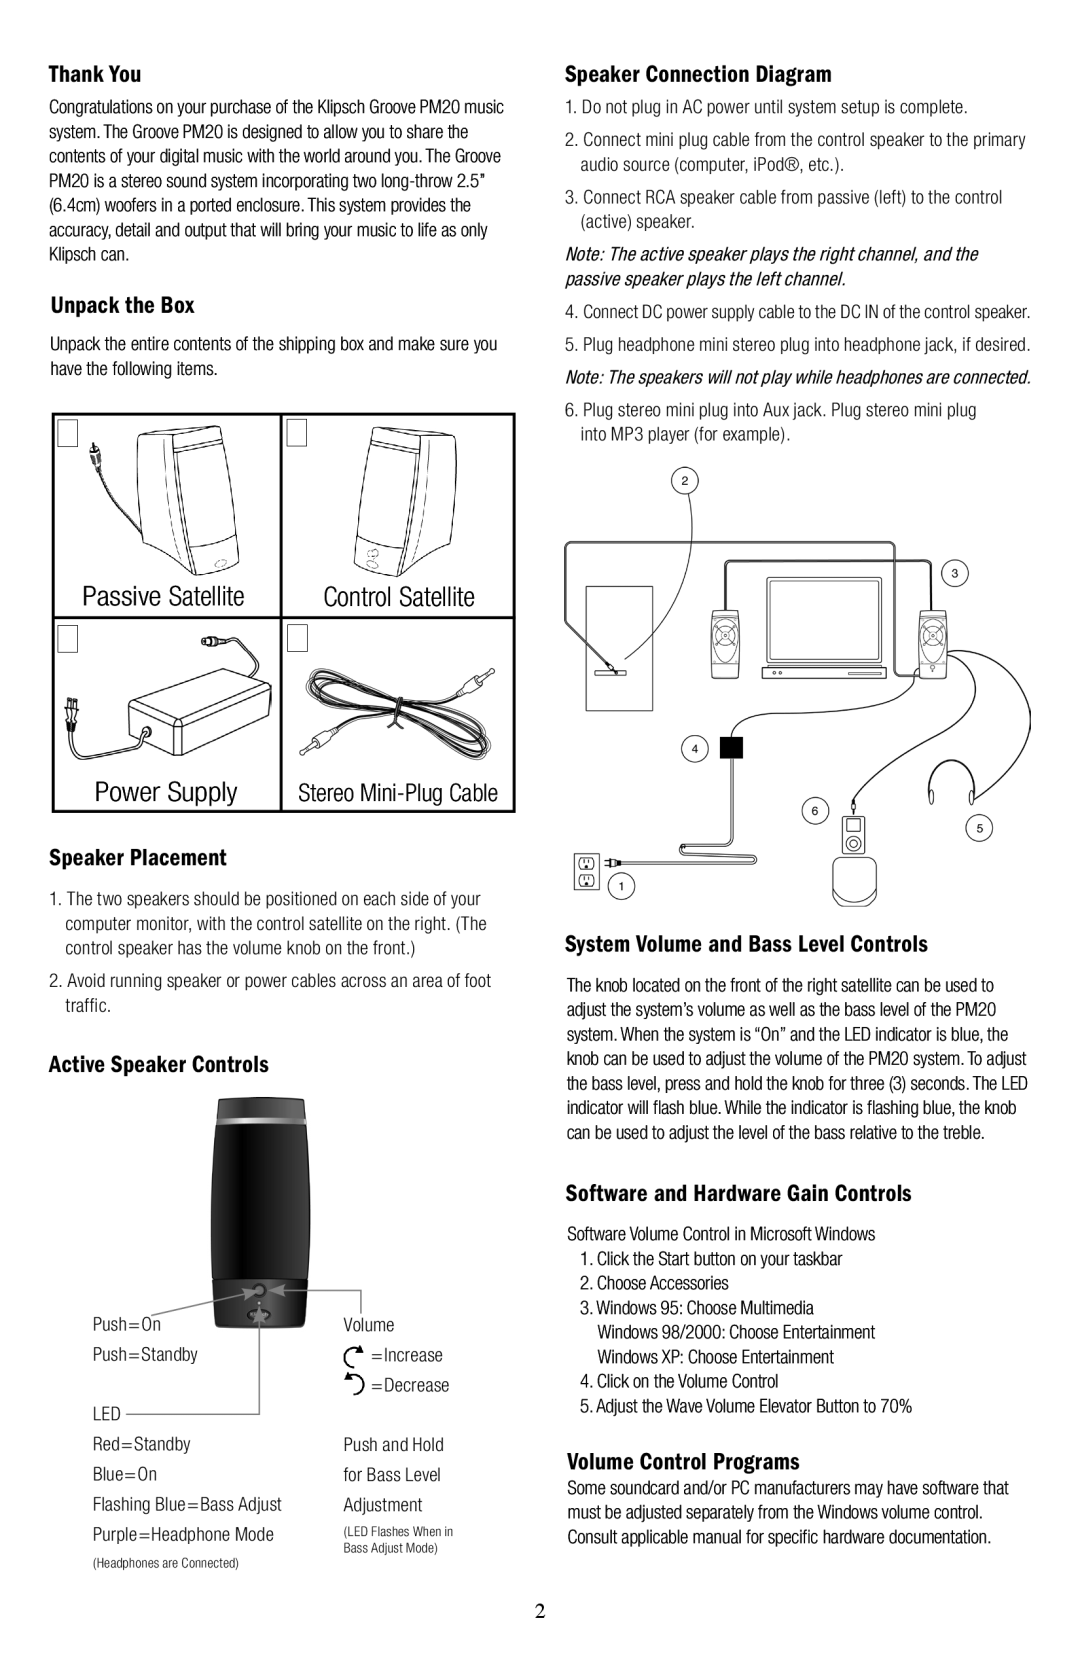 Klipsch PM20 owner manual Thank You, Unpack the Box, Passive Satellite, Speaker Placement, Active Speaker Controls 